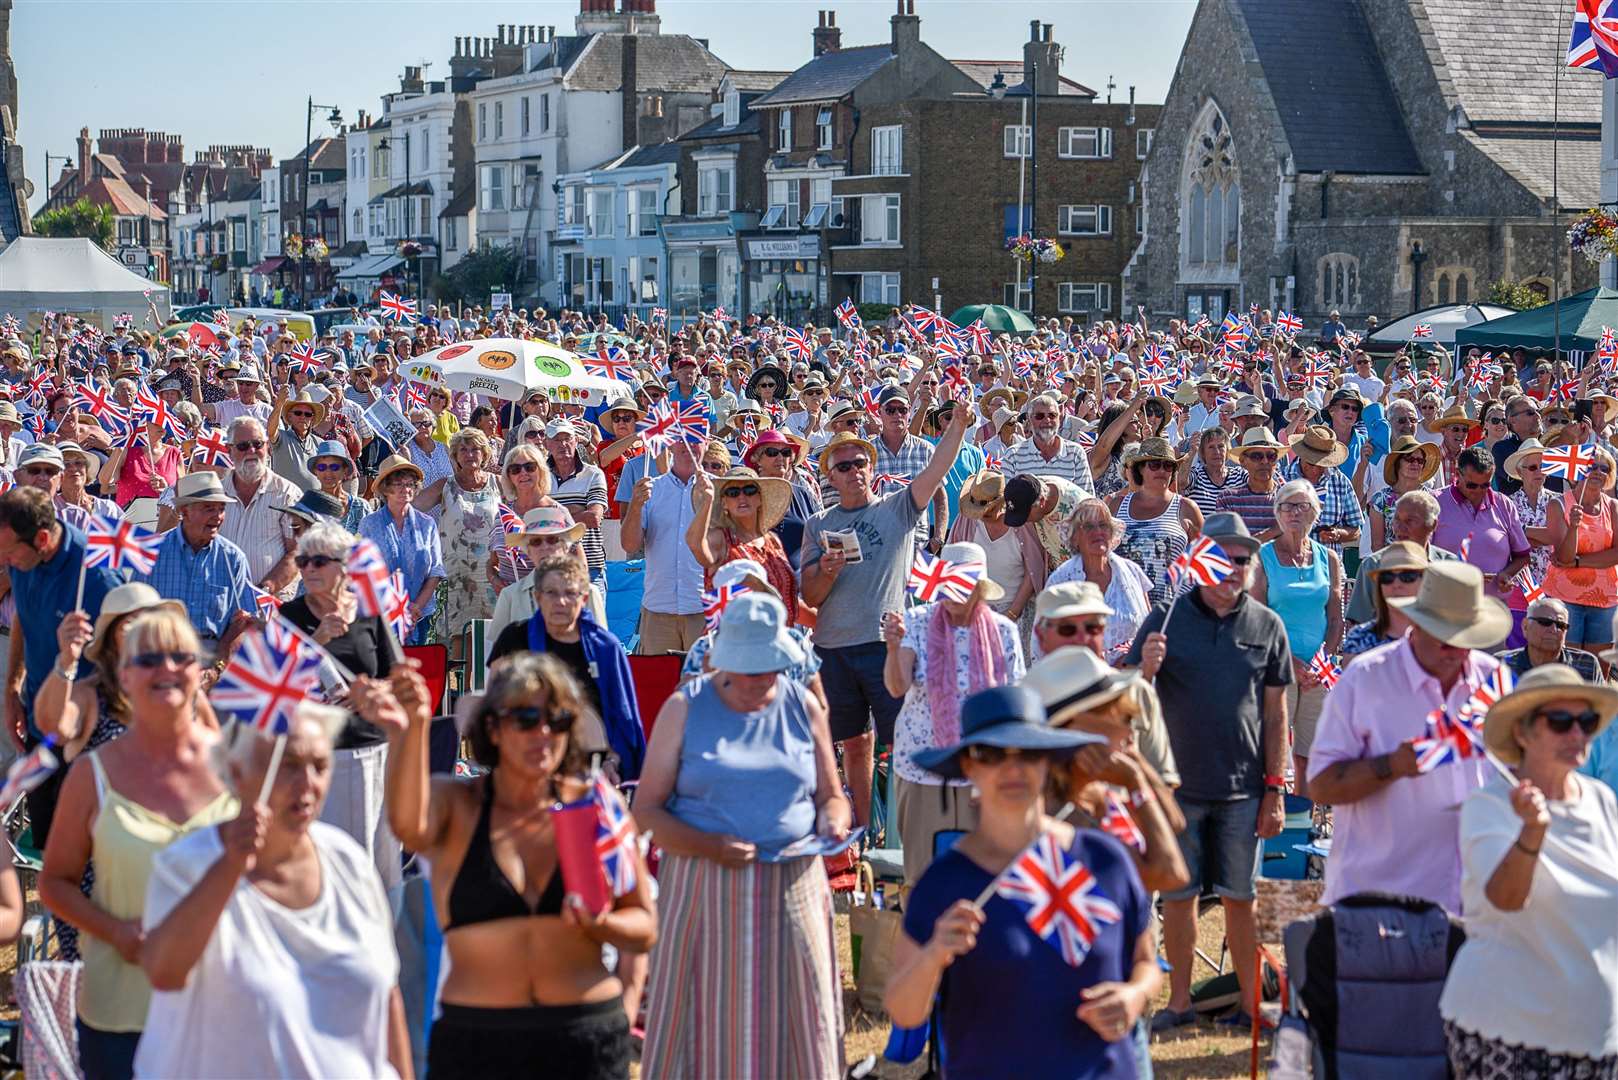 Thousands turned out to see HM Portsmouth Band led by Lt Col Jon Ridley in July 2018. Picture: Alan Langley